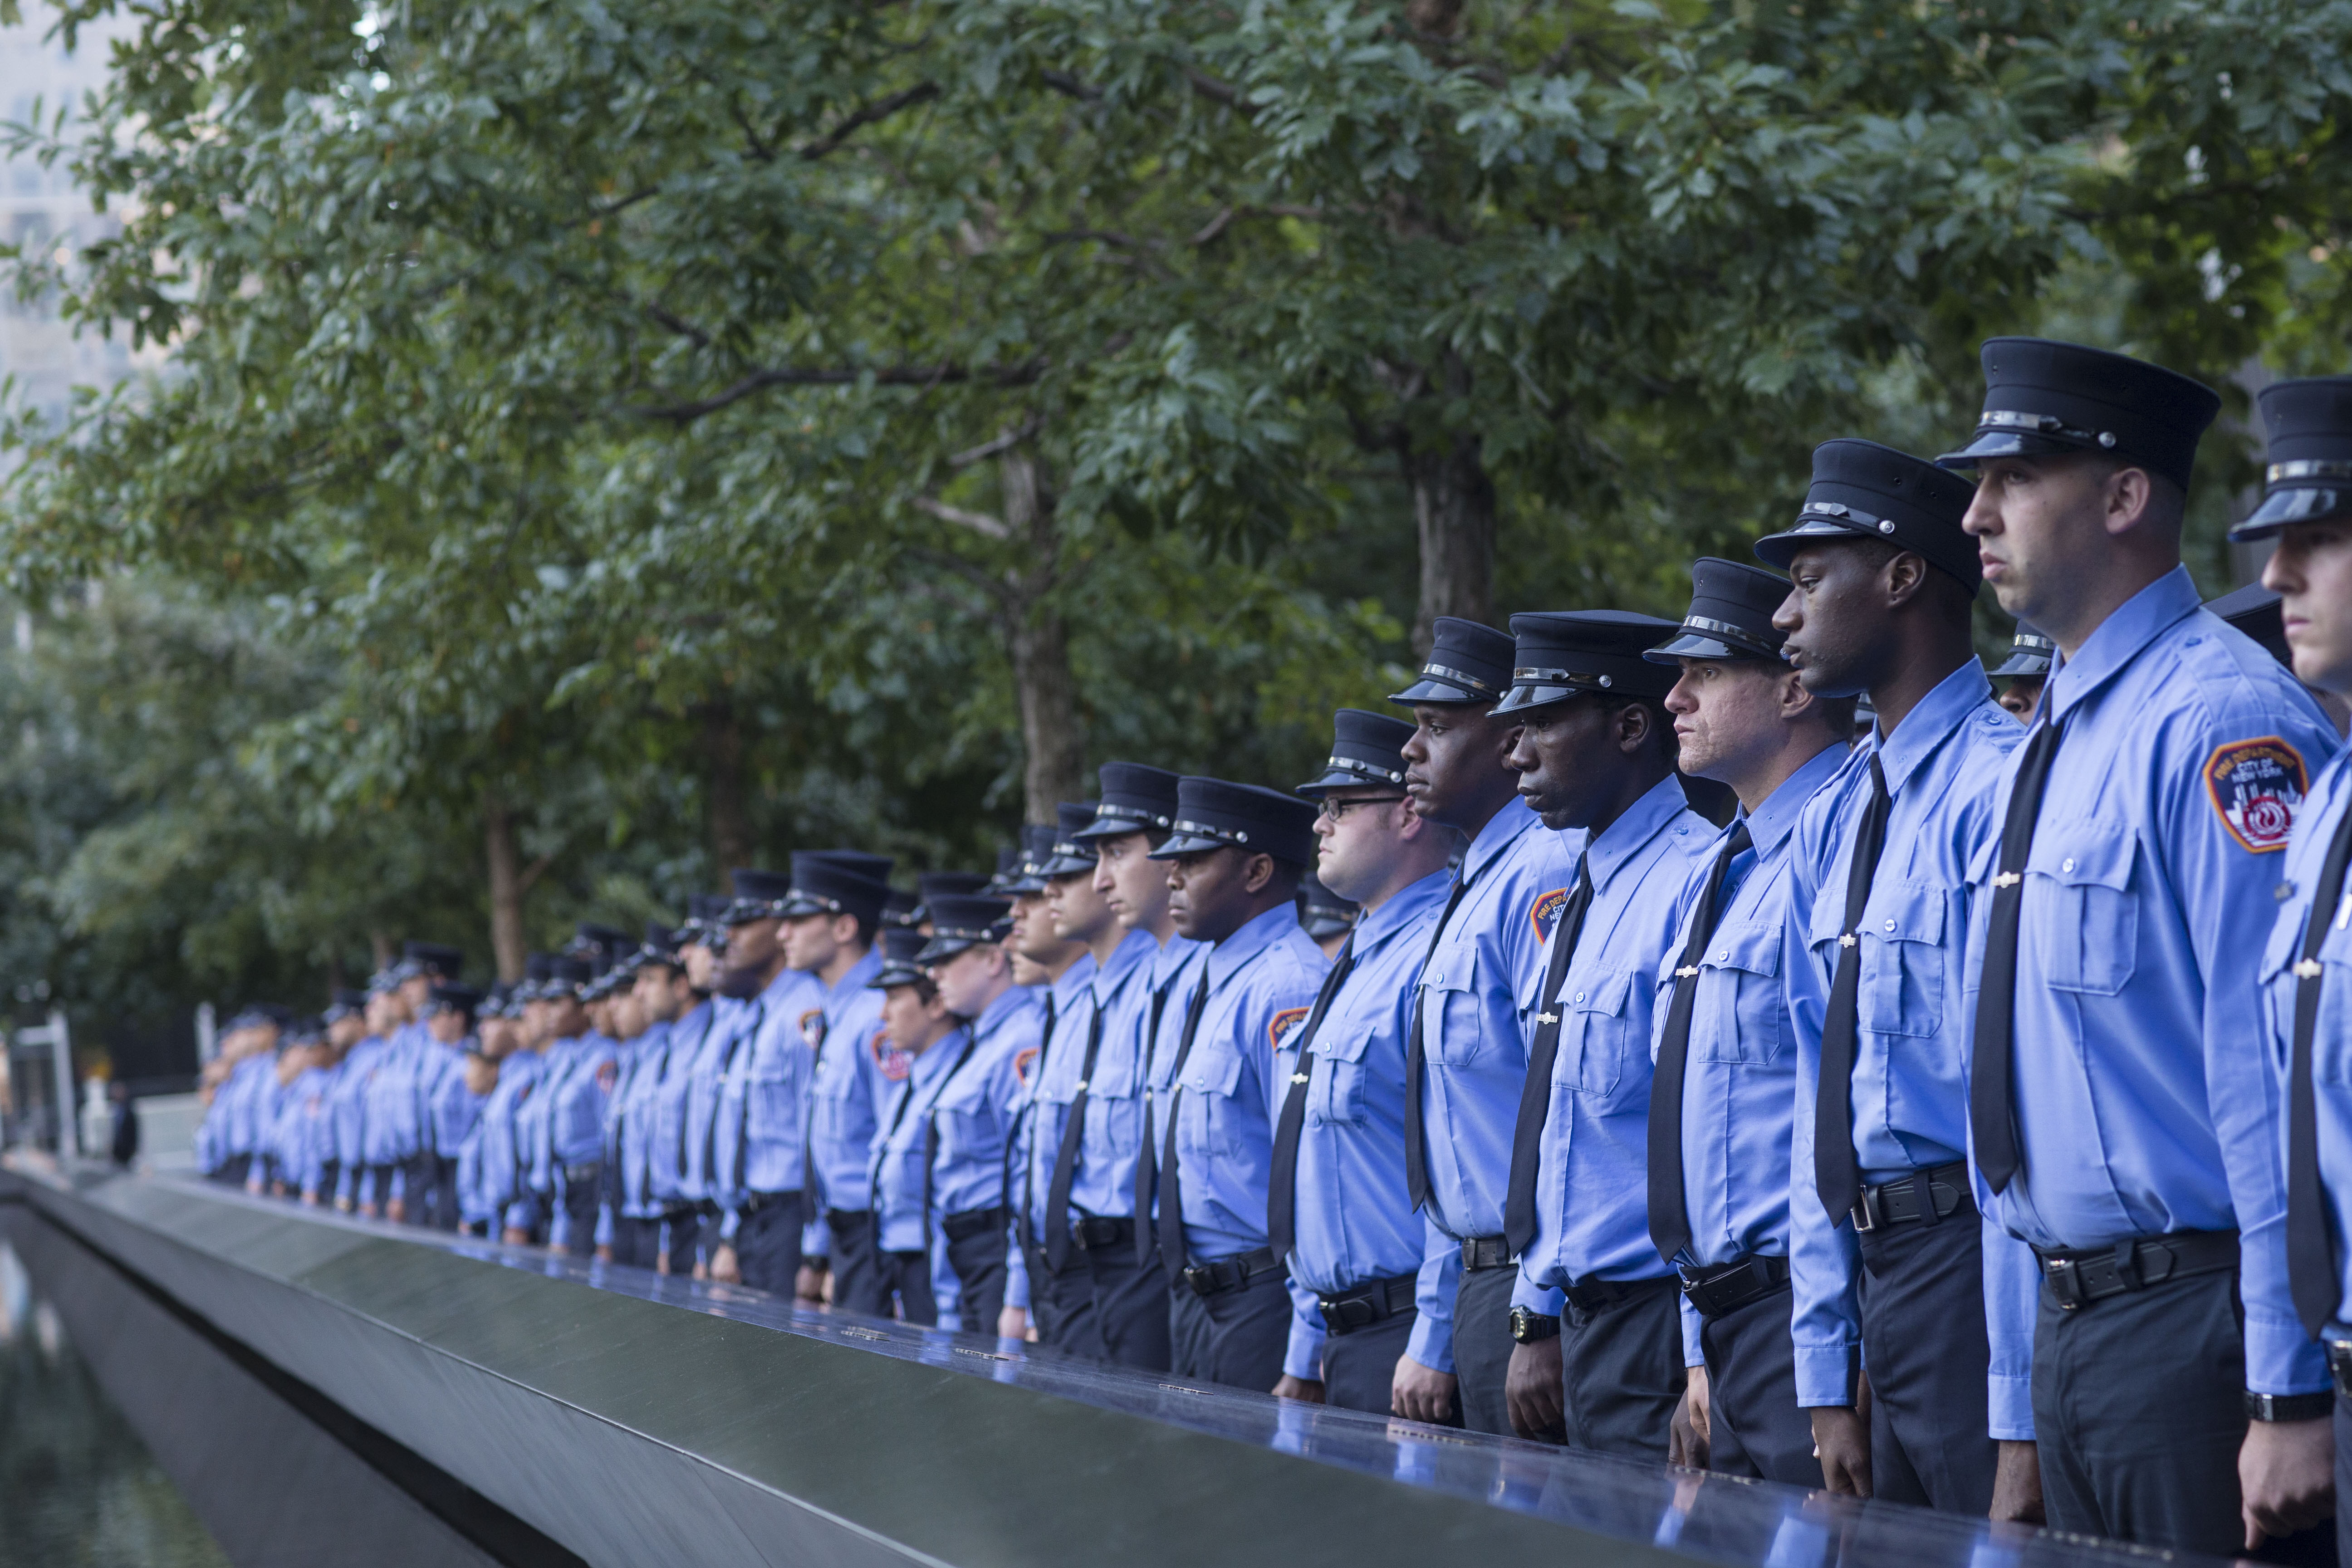 A probationary class of FDNY EMTs stands in front of a reflecting pool at the 9/11 Memorial.